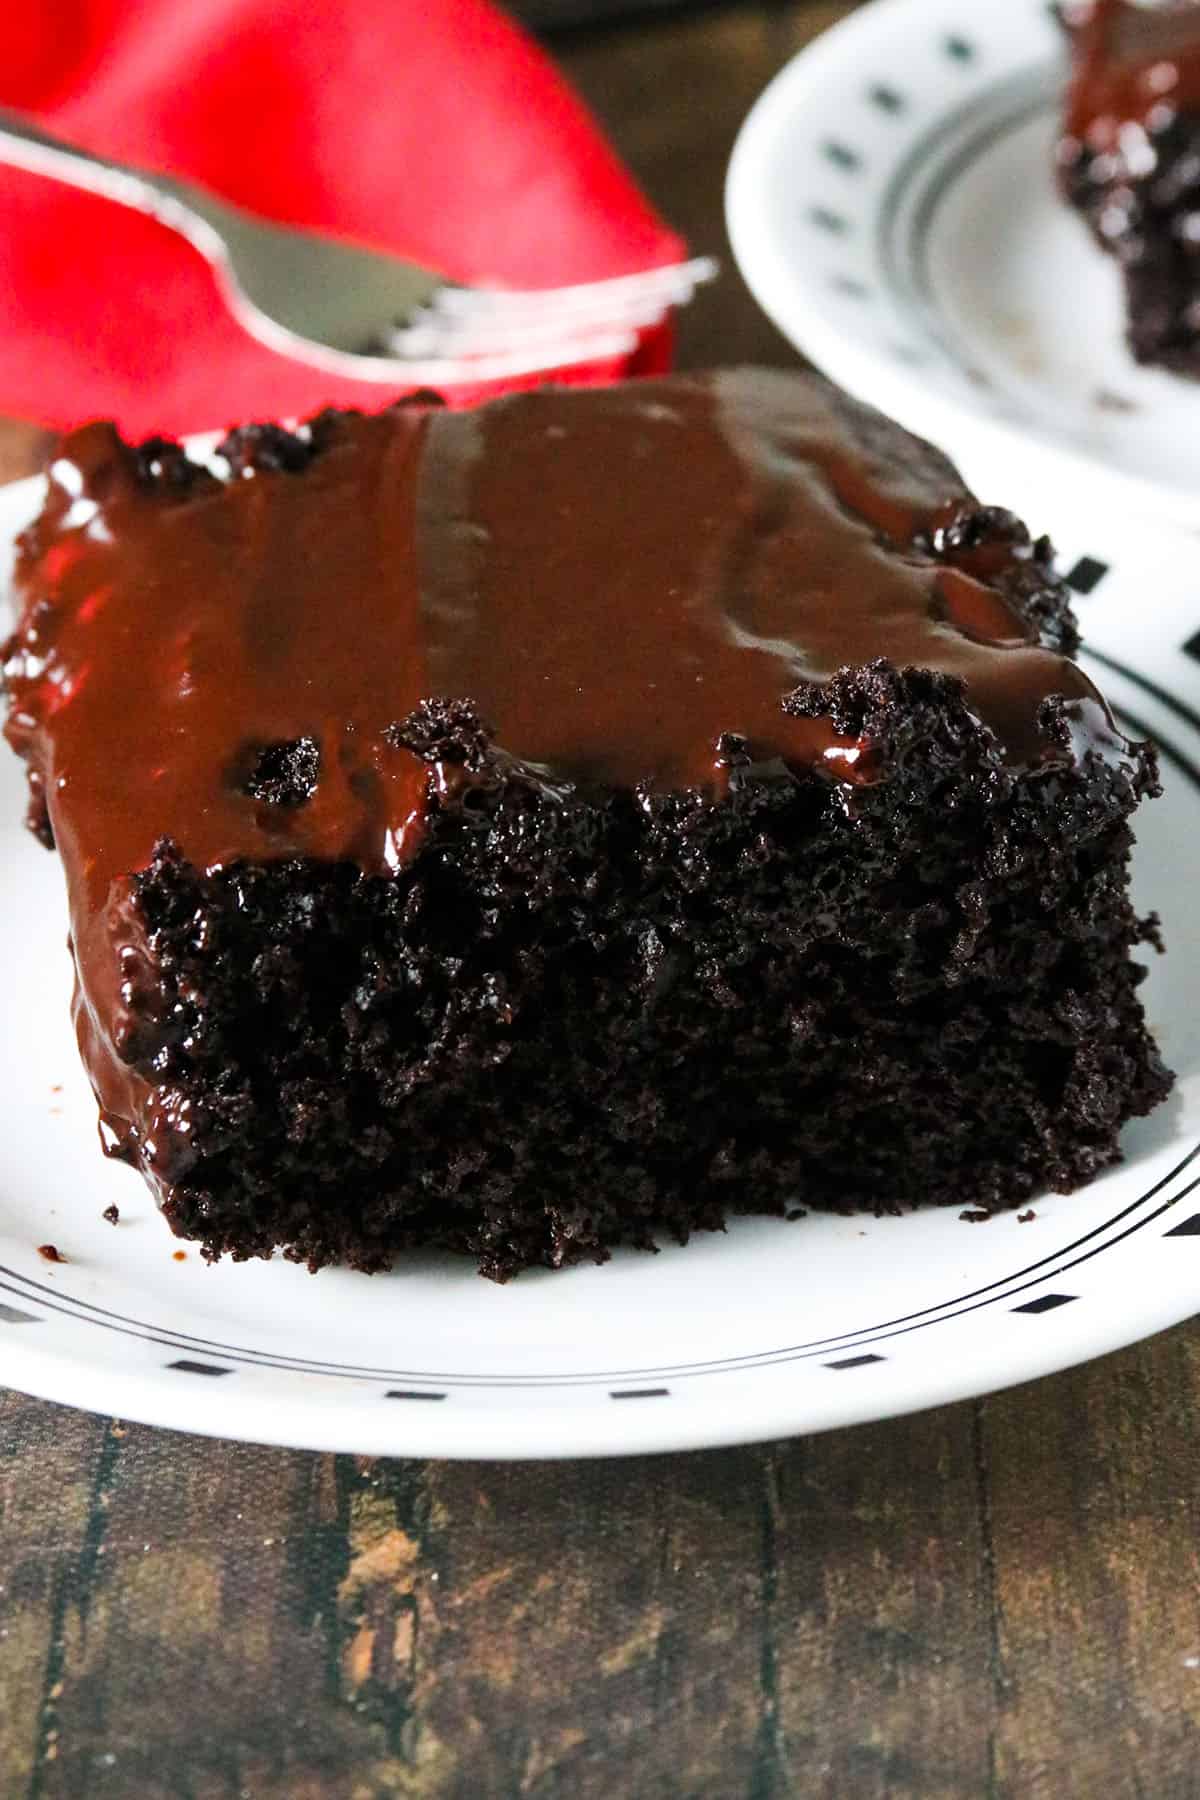 A slice of Devil's Food Sheet cake on a plate.